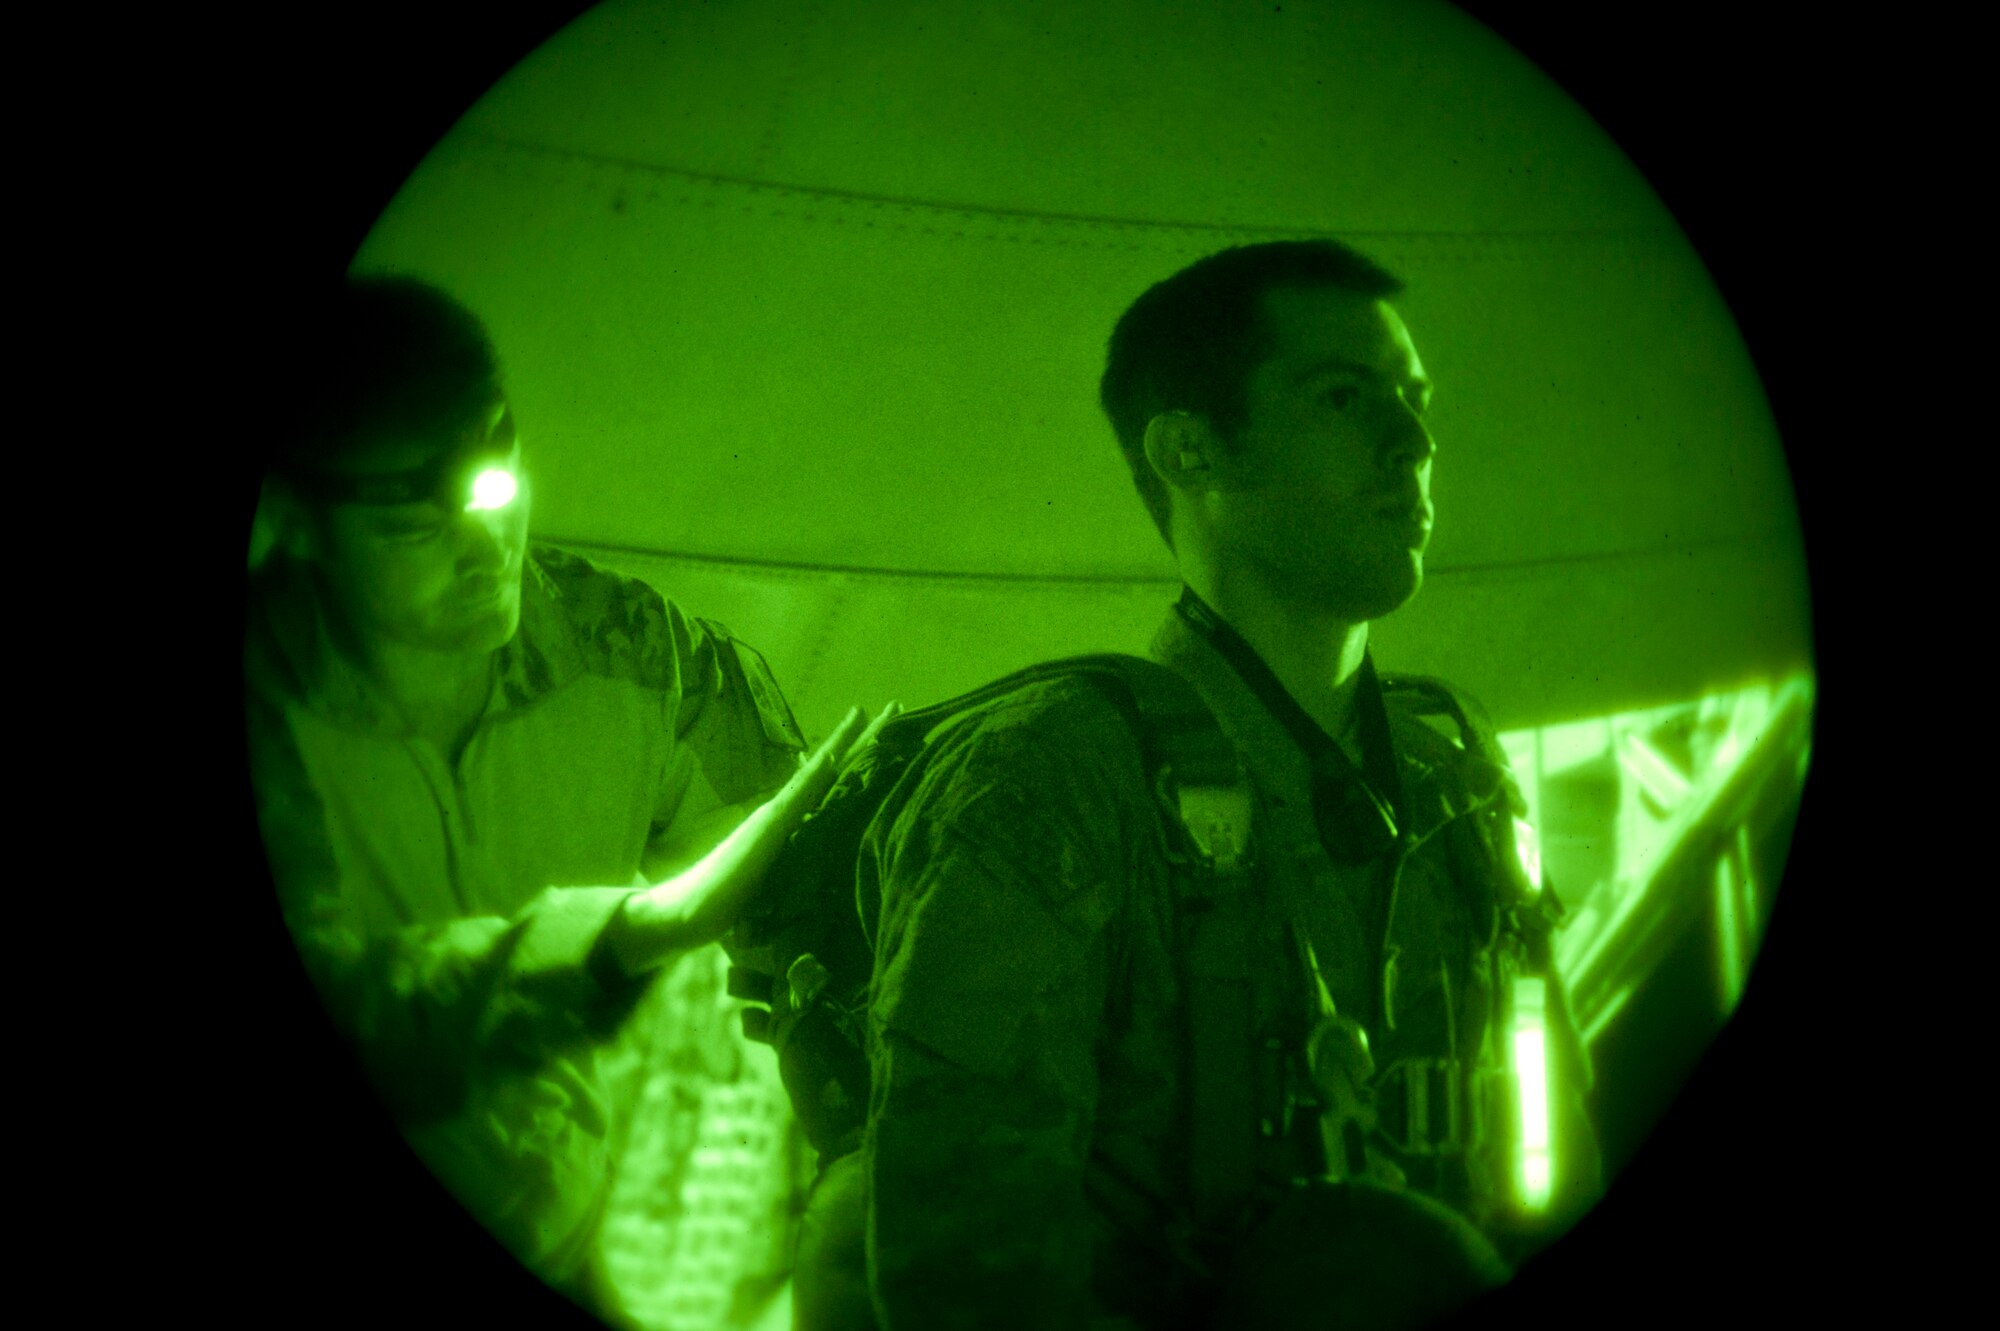 Tech. Sgt. Dave Scarborough (left), 58th Rescue Squadron Survival Evasion Resistance and Escape specialist, checks the parachute of Staff Sgt. Eric McNair, a SERE specialist assigned to the 19th Operations Support Squadron, Little Rock Air Force Base, Ark., before a night training exercise during Red Flag 15-1 at Nellis AFB, Nev., Feb. 9, 2015. Red Flag night missions present the additional challenge of low visibility, testing aircrew’s ability to execute the mission at any hour in a contested and degraded environment. (U.S. Air Force photo by Senior Airman Thomas Spangler)